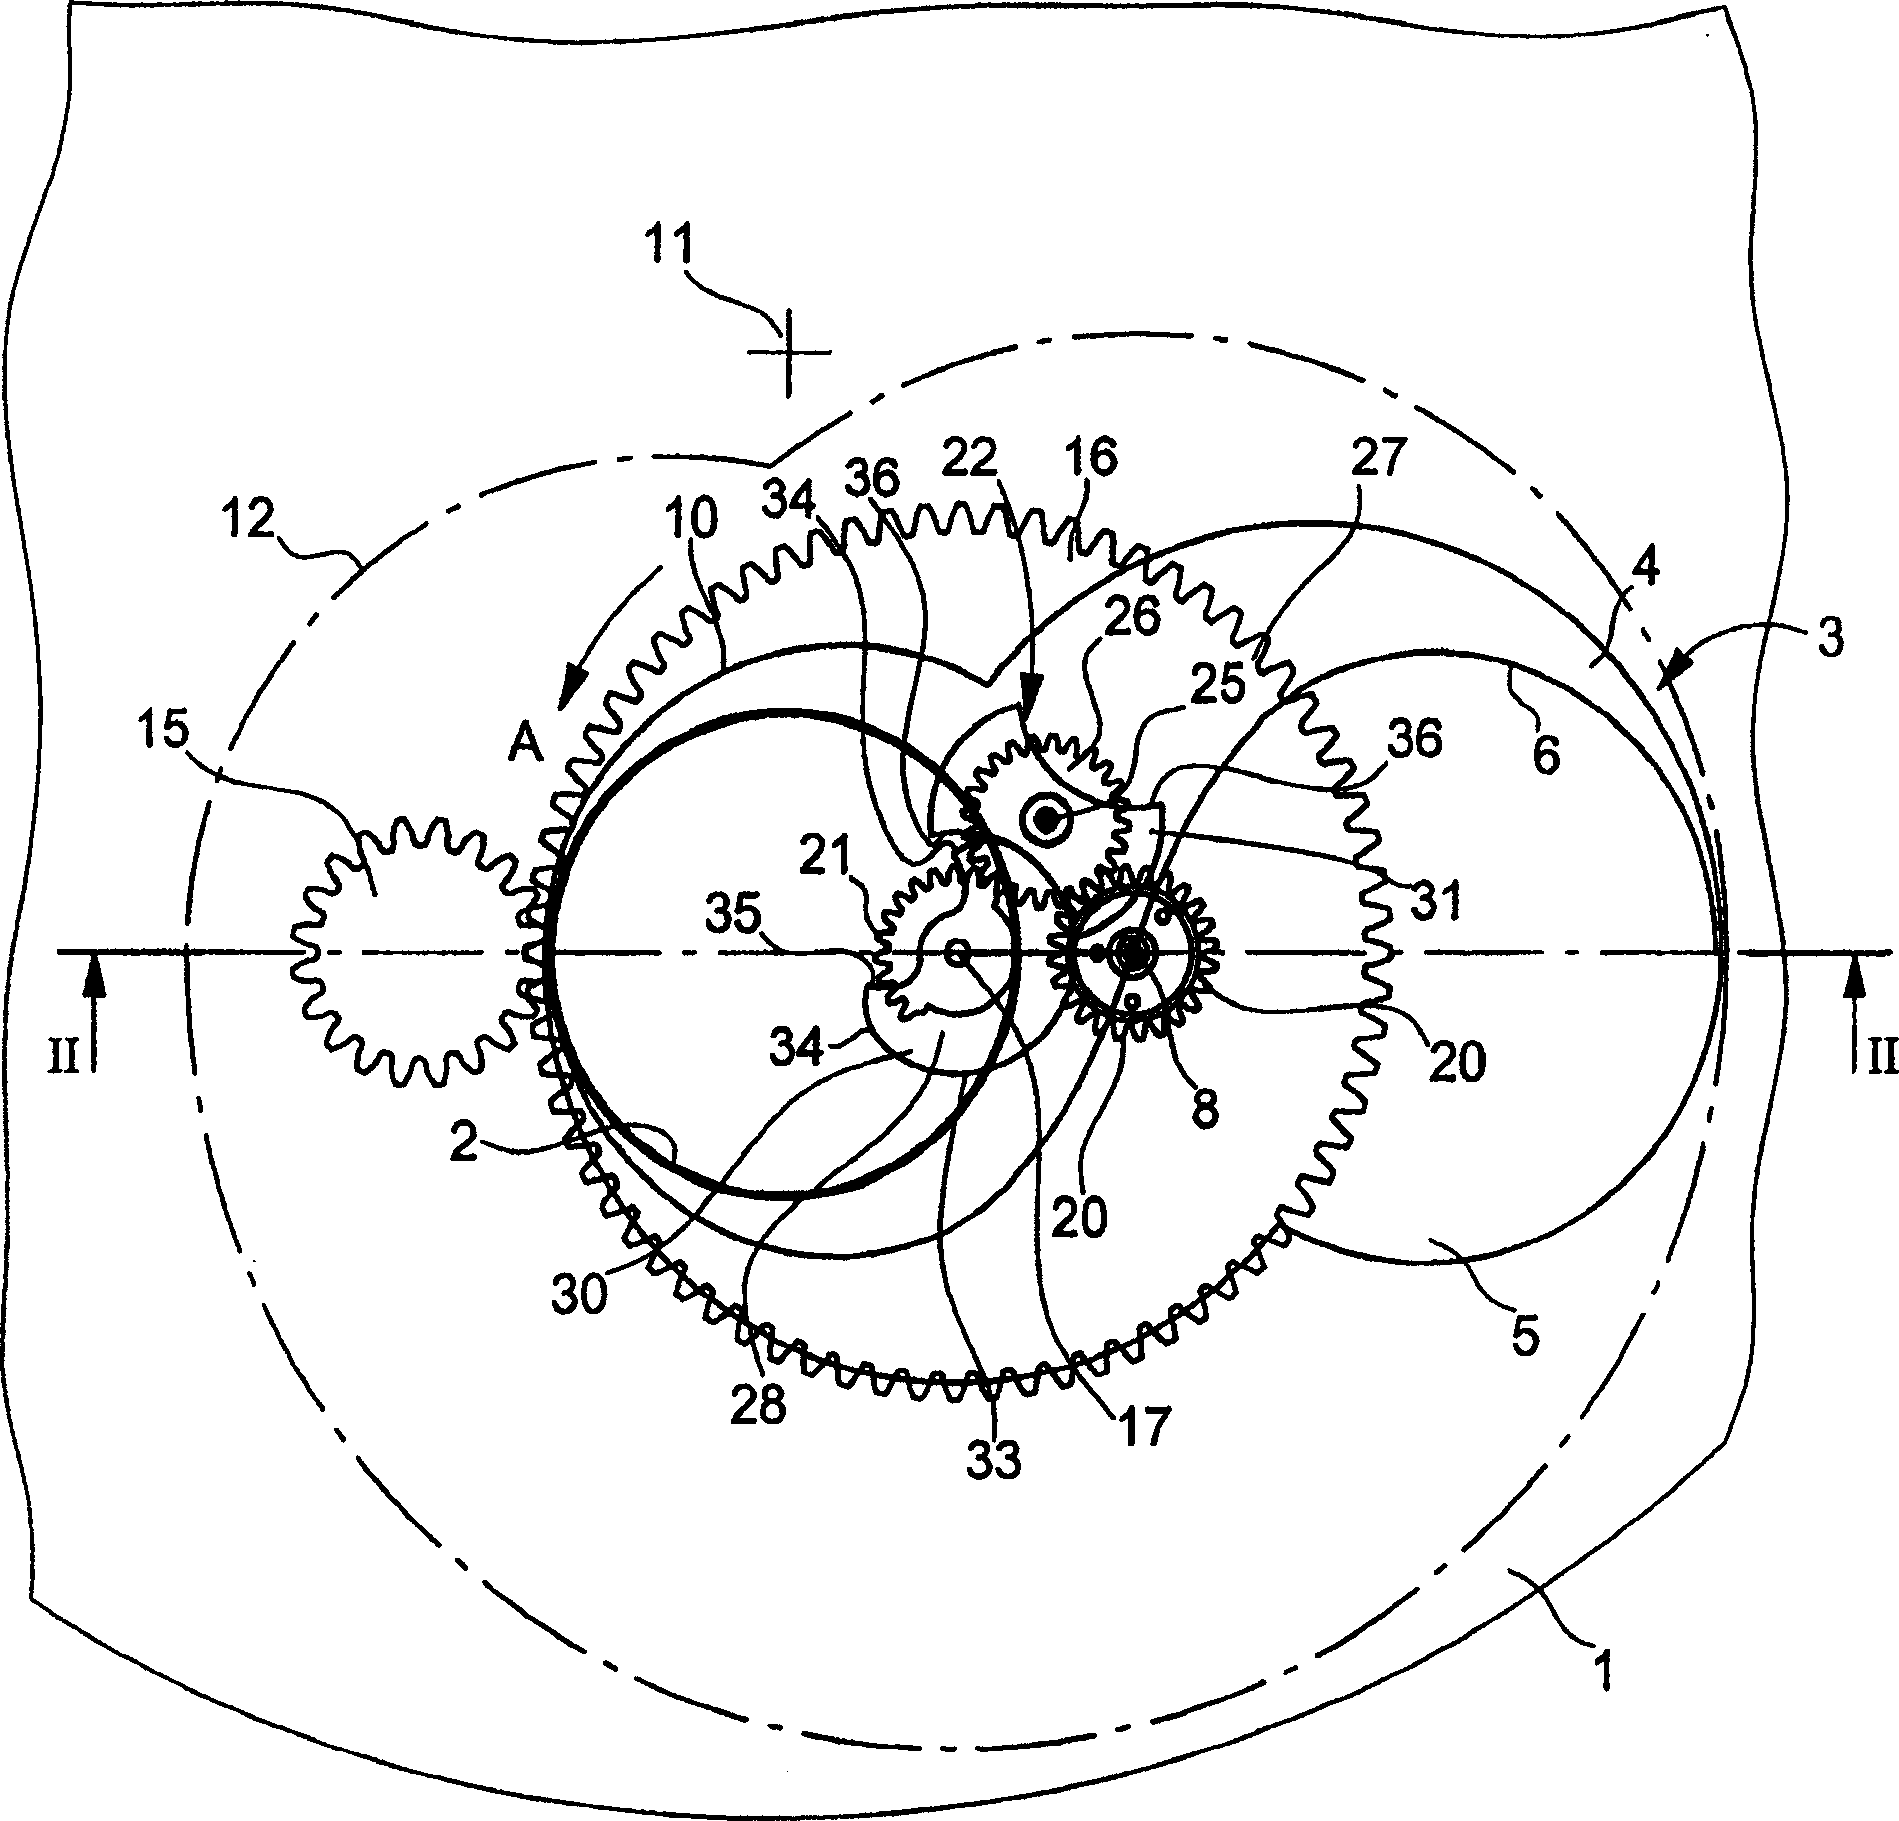 Moon phase display device, particularly for a timepiece